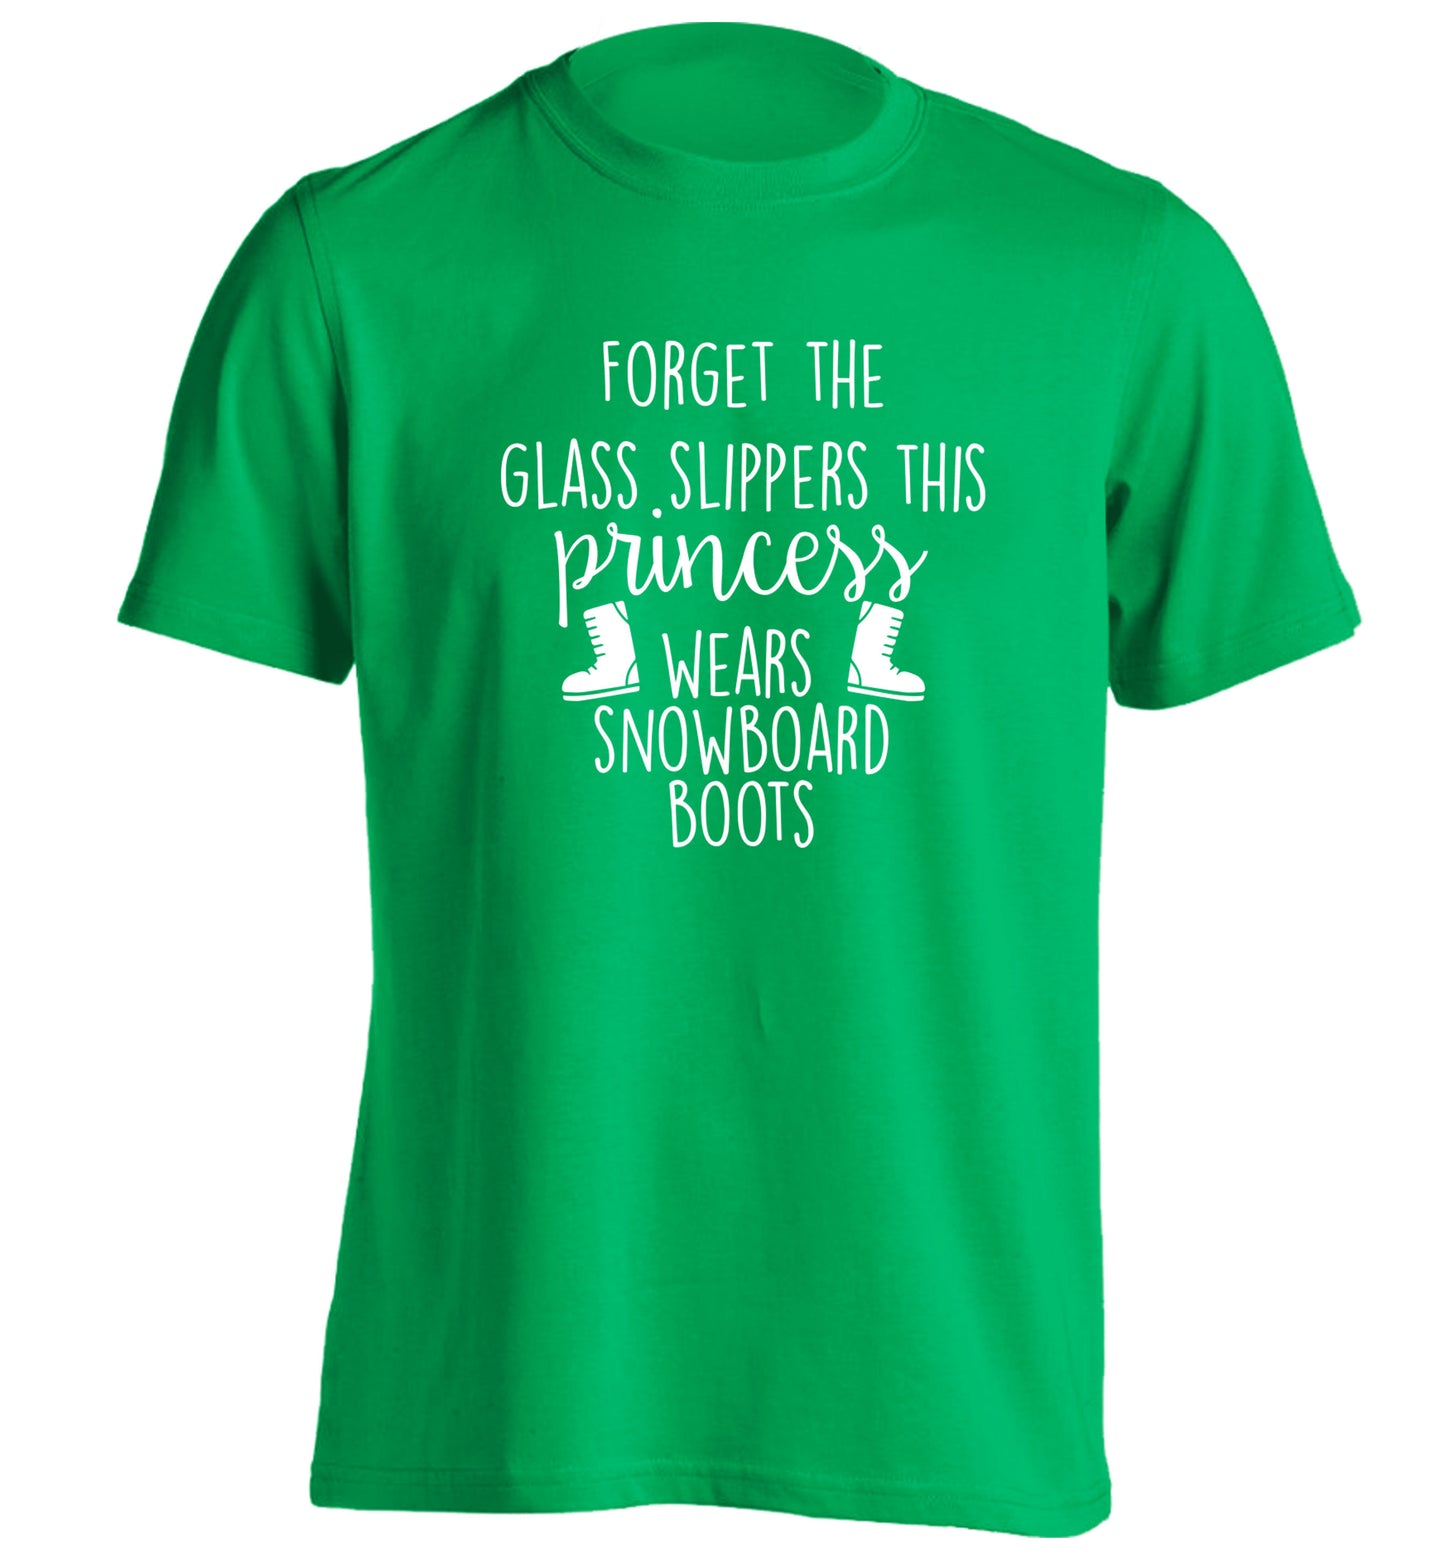 Forget the glass slippers this princess wears snowboard boots adults unisex green Tshirt 2XL